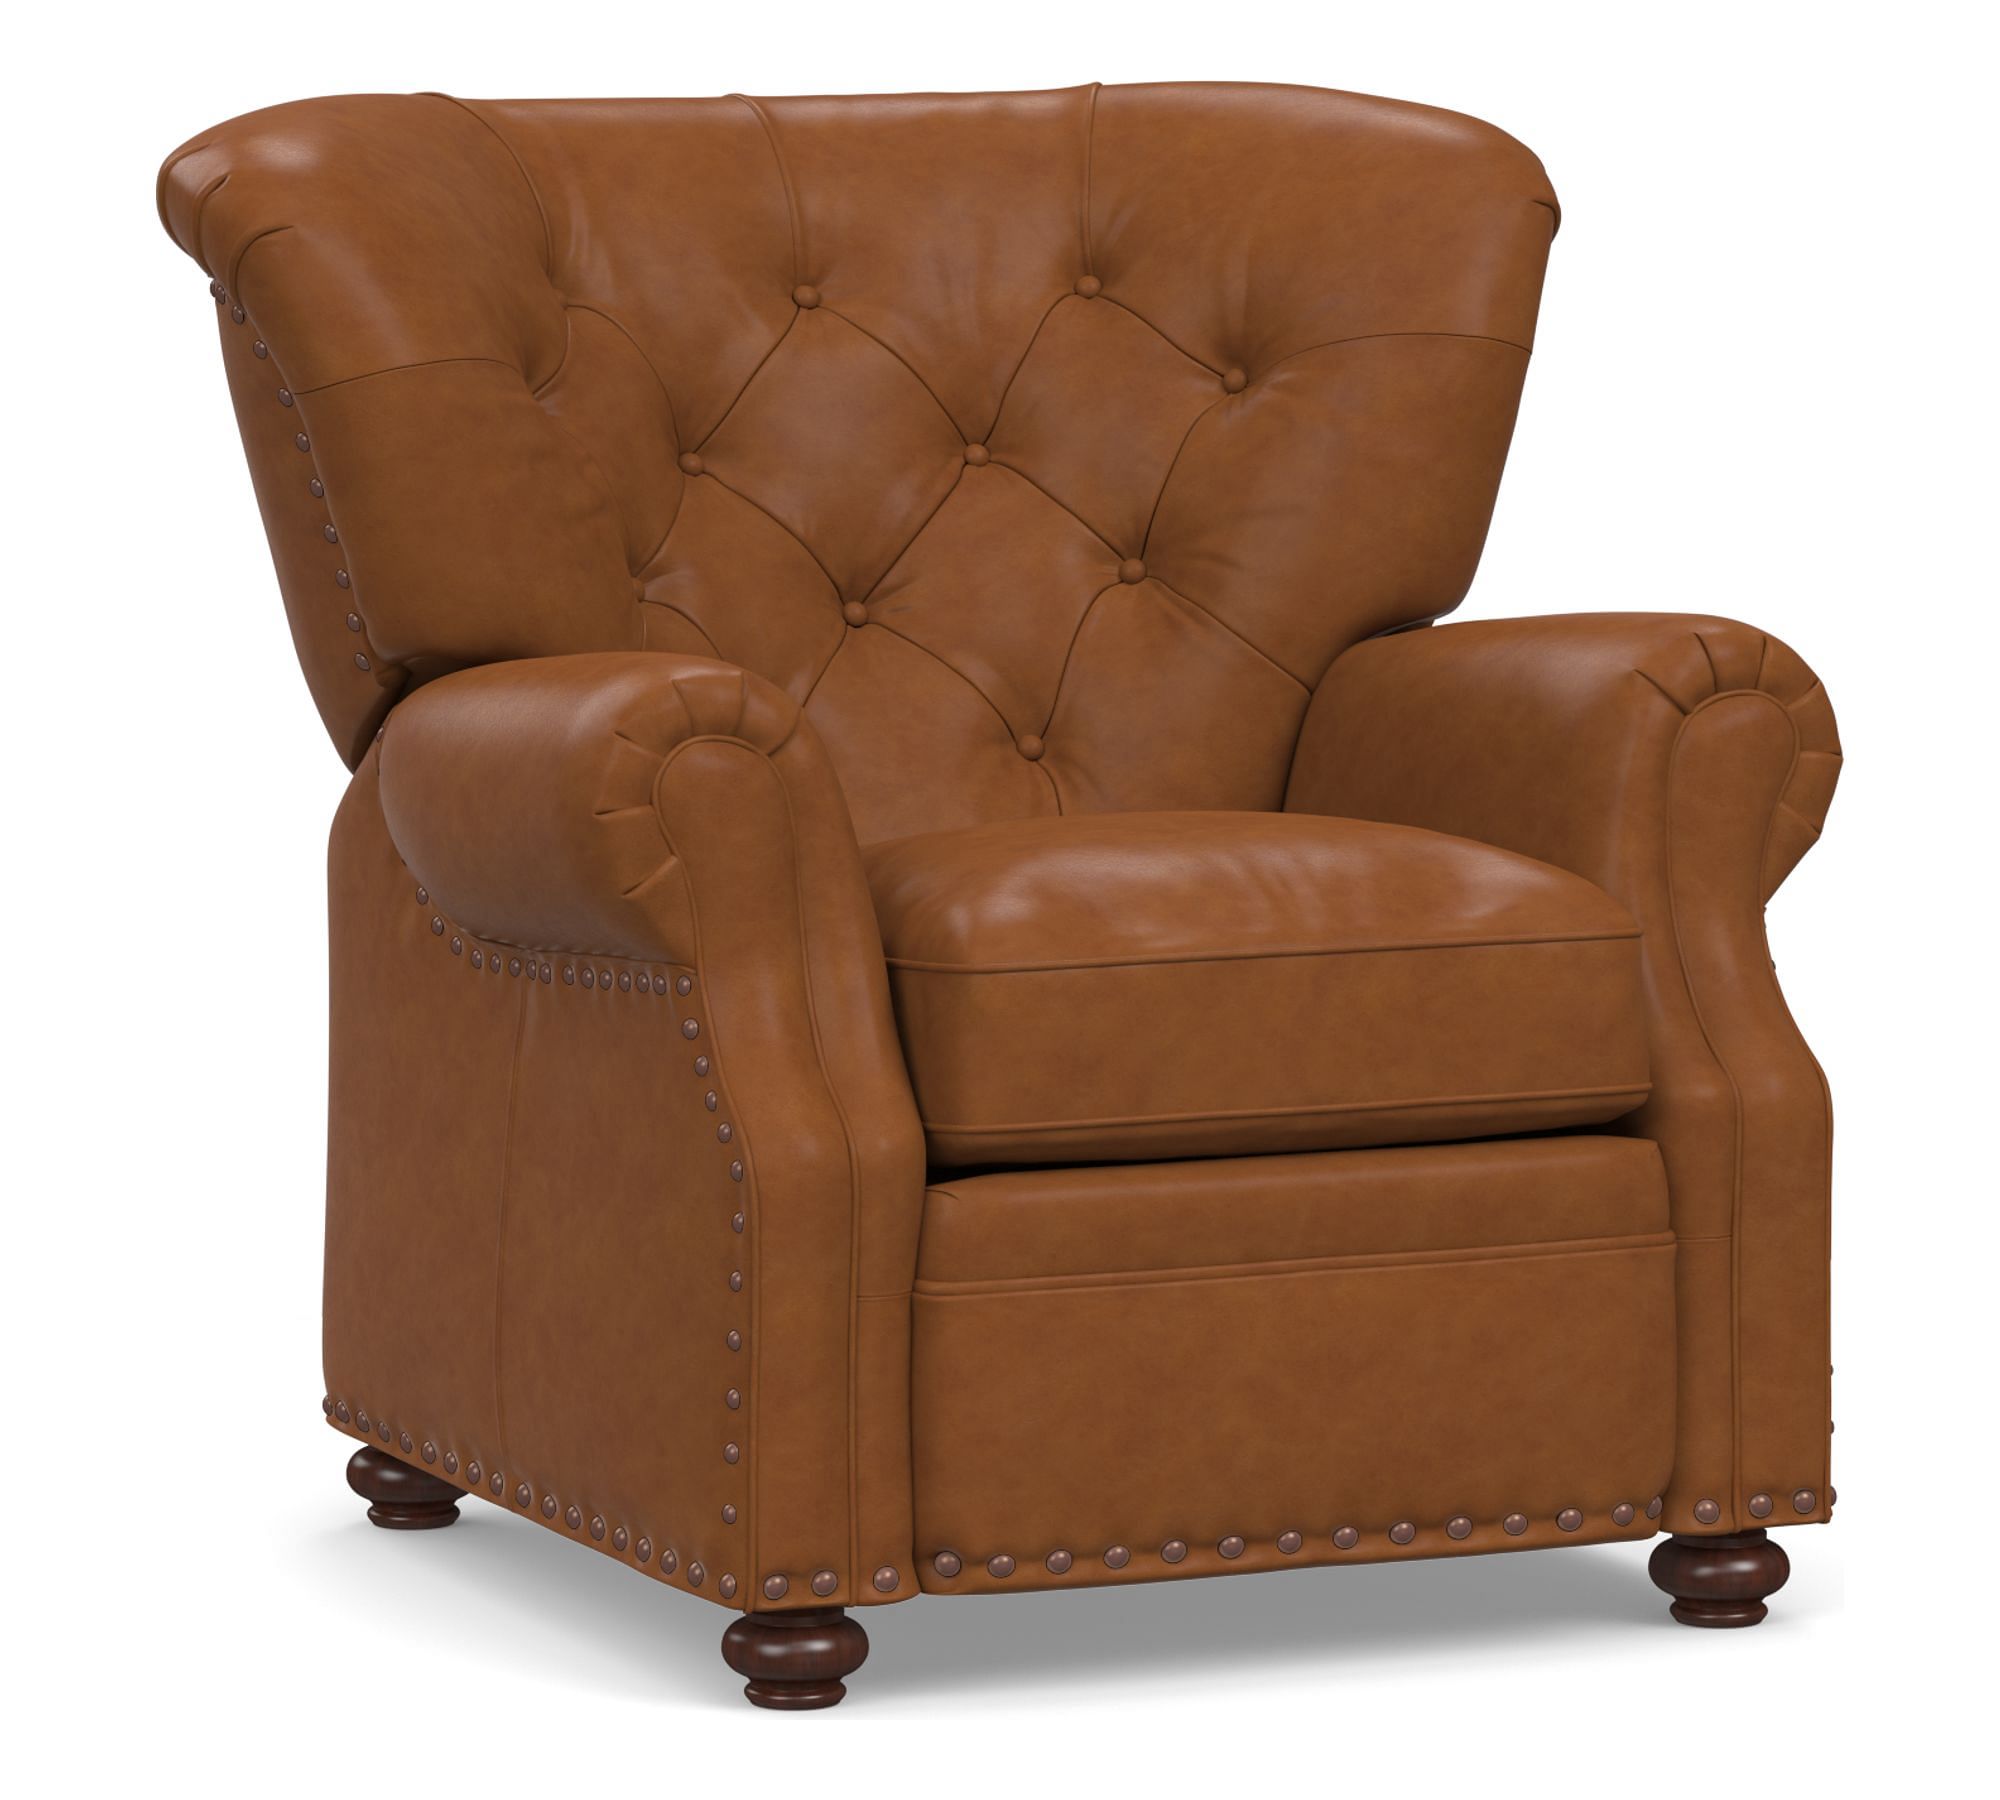 Lansing Tufted Leather Recliner